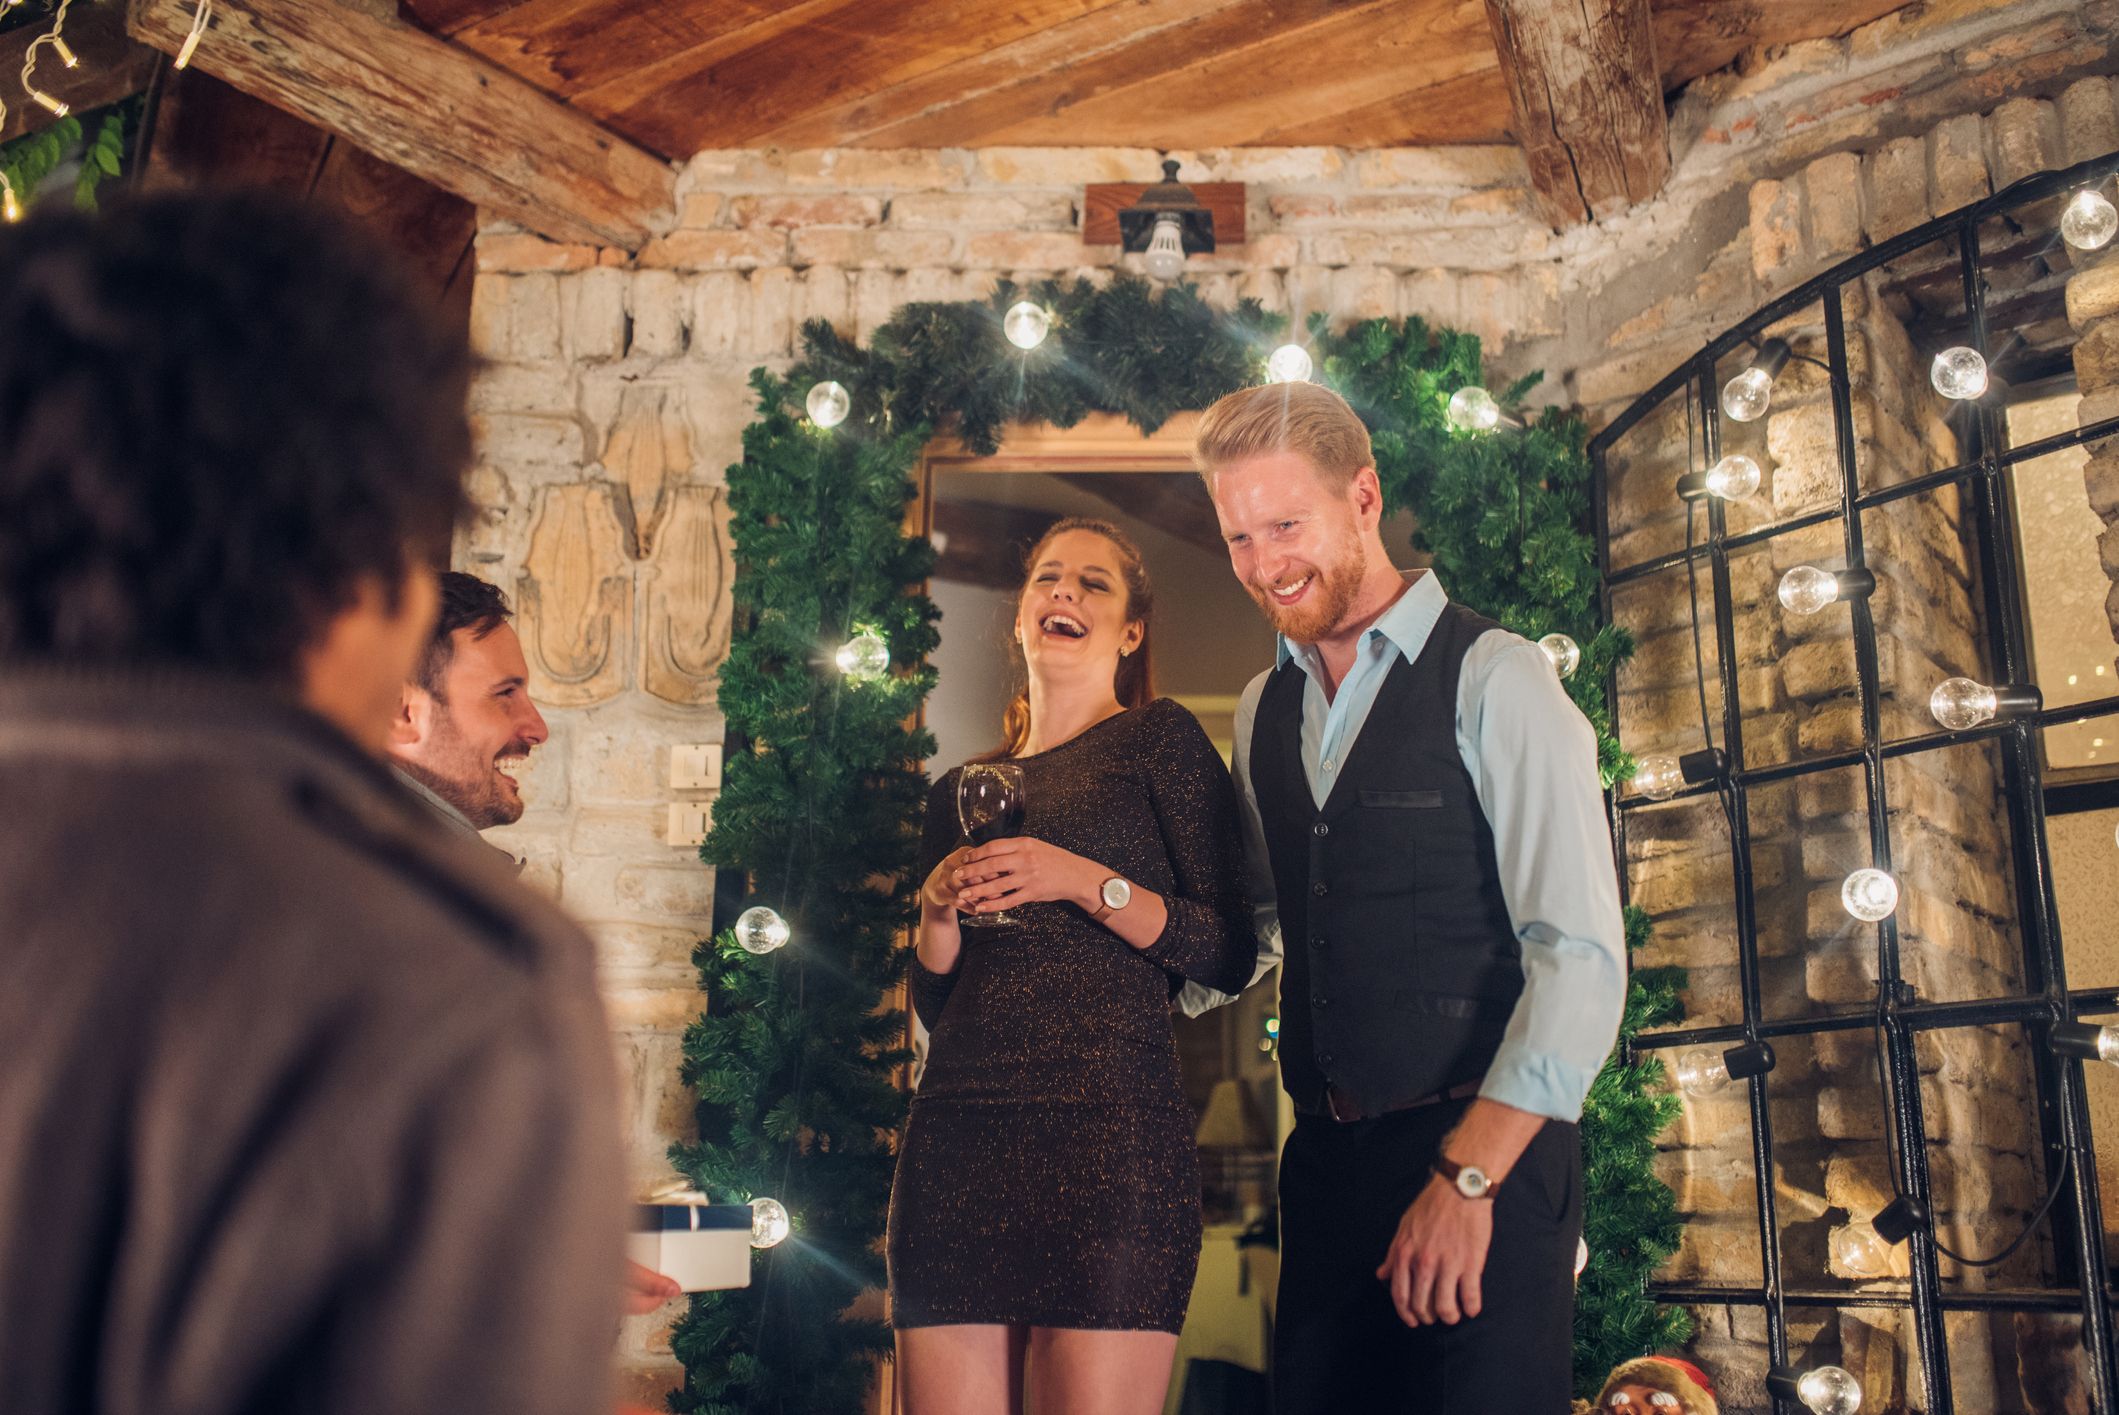 10 Tips to Host a Holiday Party, According to Event Planners